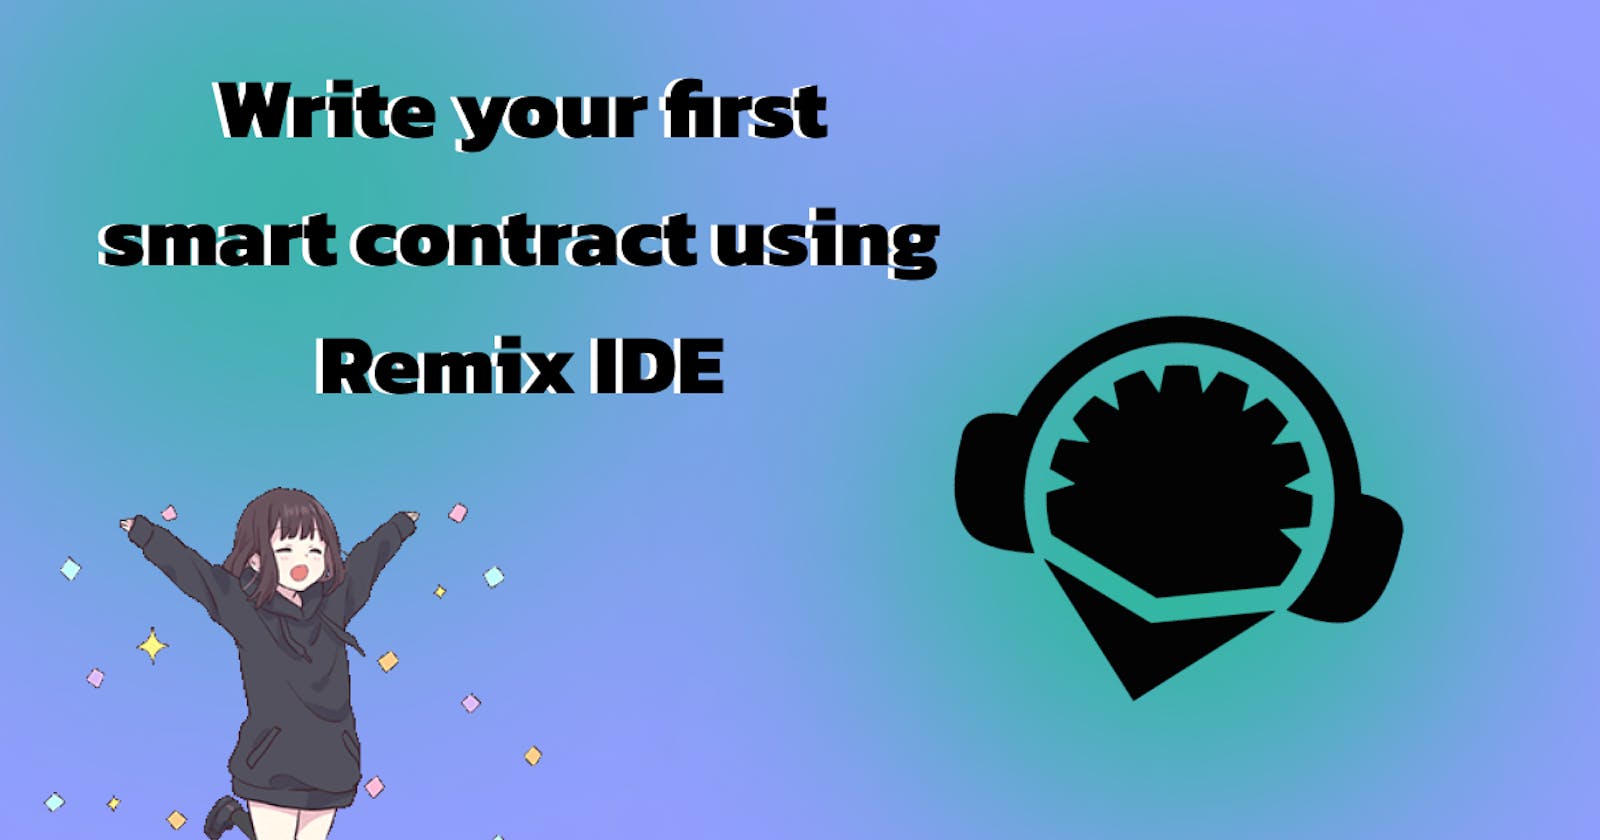 Write your first smart contract using Remix IDE